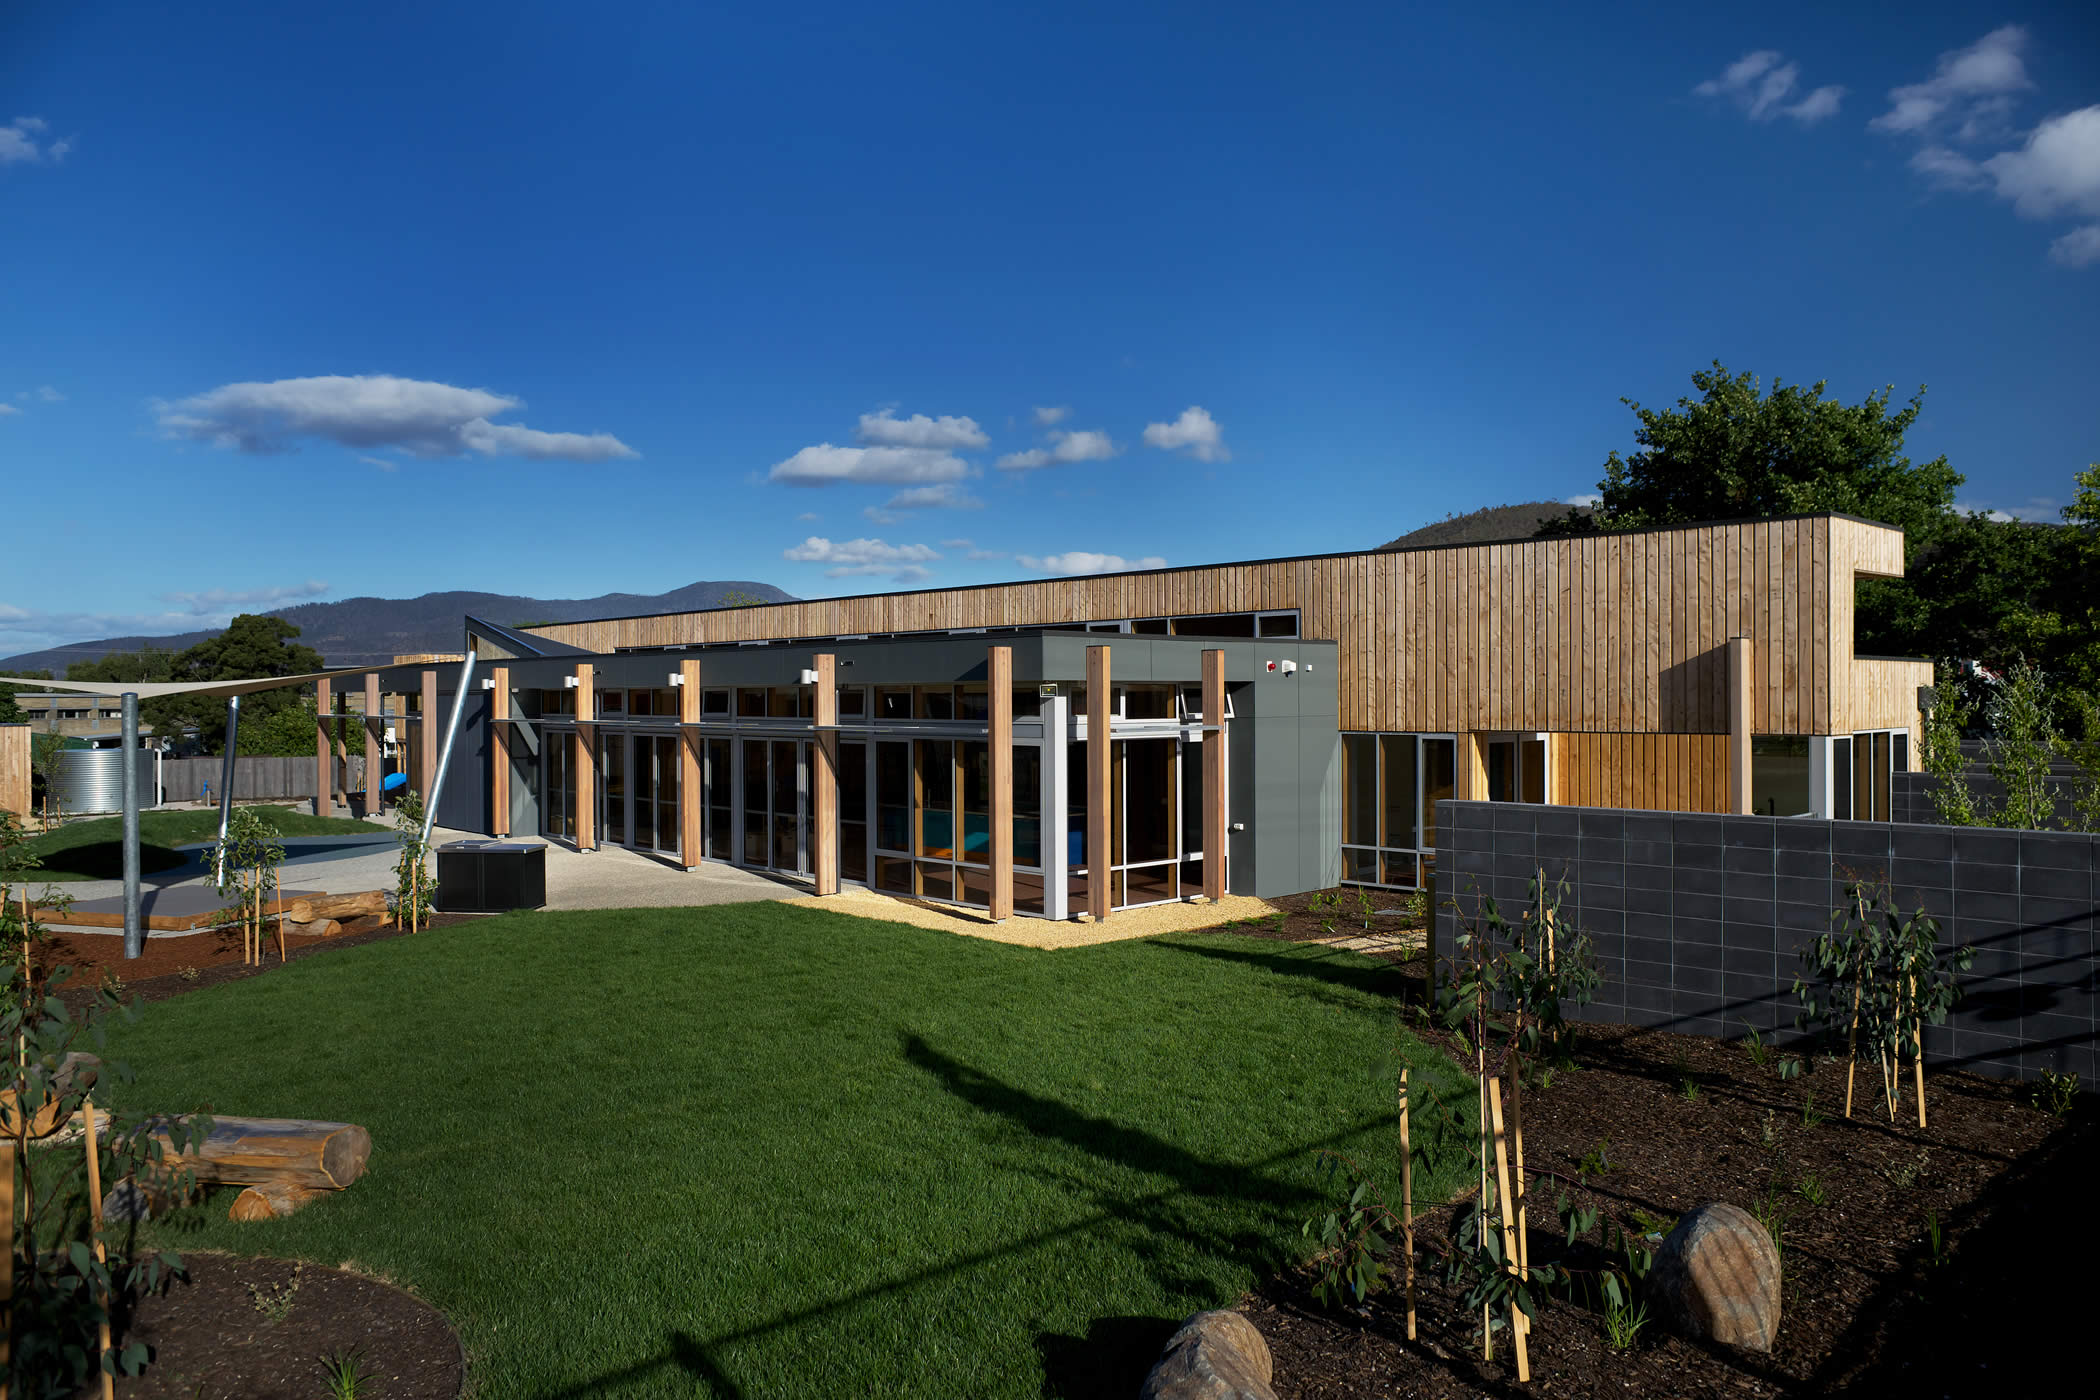 Ptunarra Child and Family Centre, New Norfolk, Tasmania: Glazed panels and bi-fold doors achieve a “pavilion in a park” feel, bring the outside in, and provide passive surveillance and a positive presence to the adjacent playground. Photo by Ray Joyce.